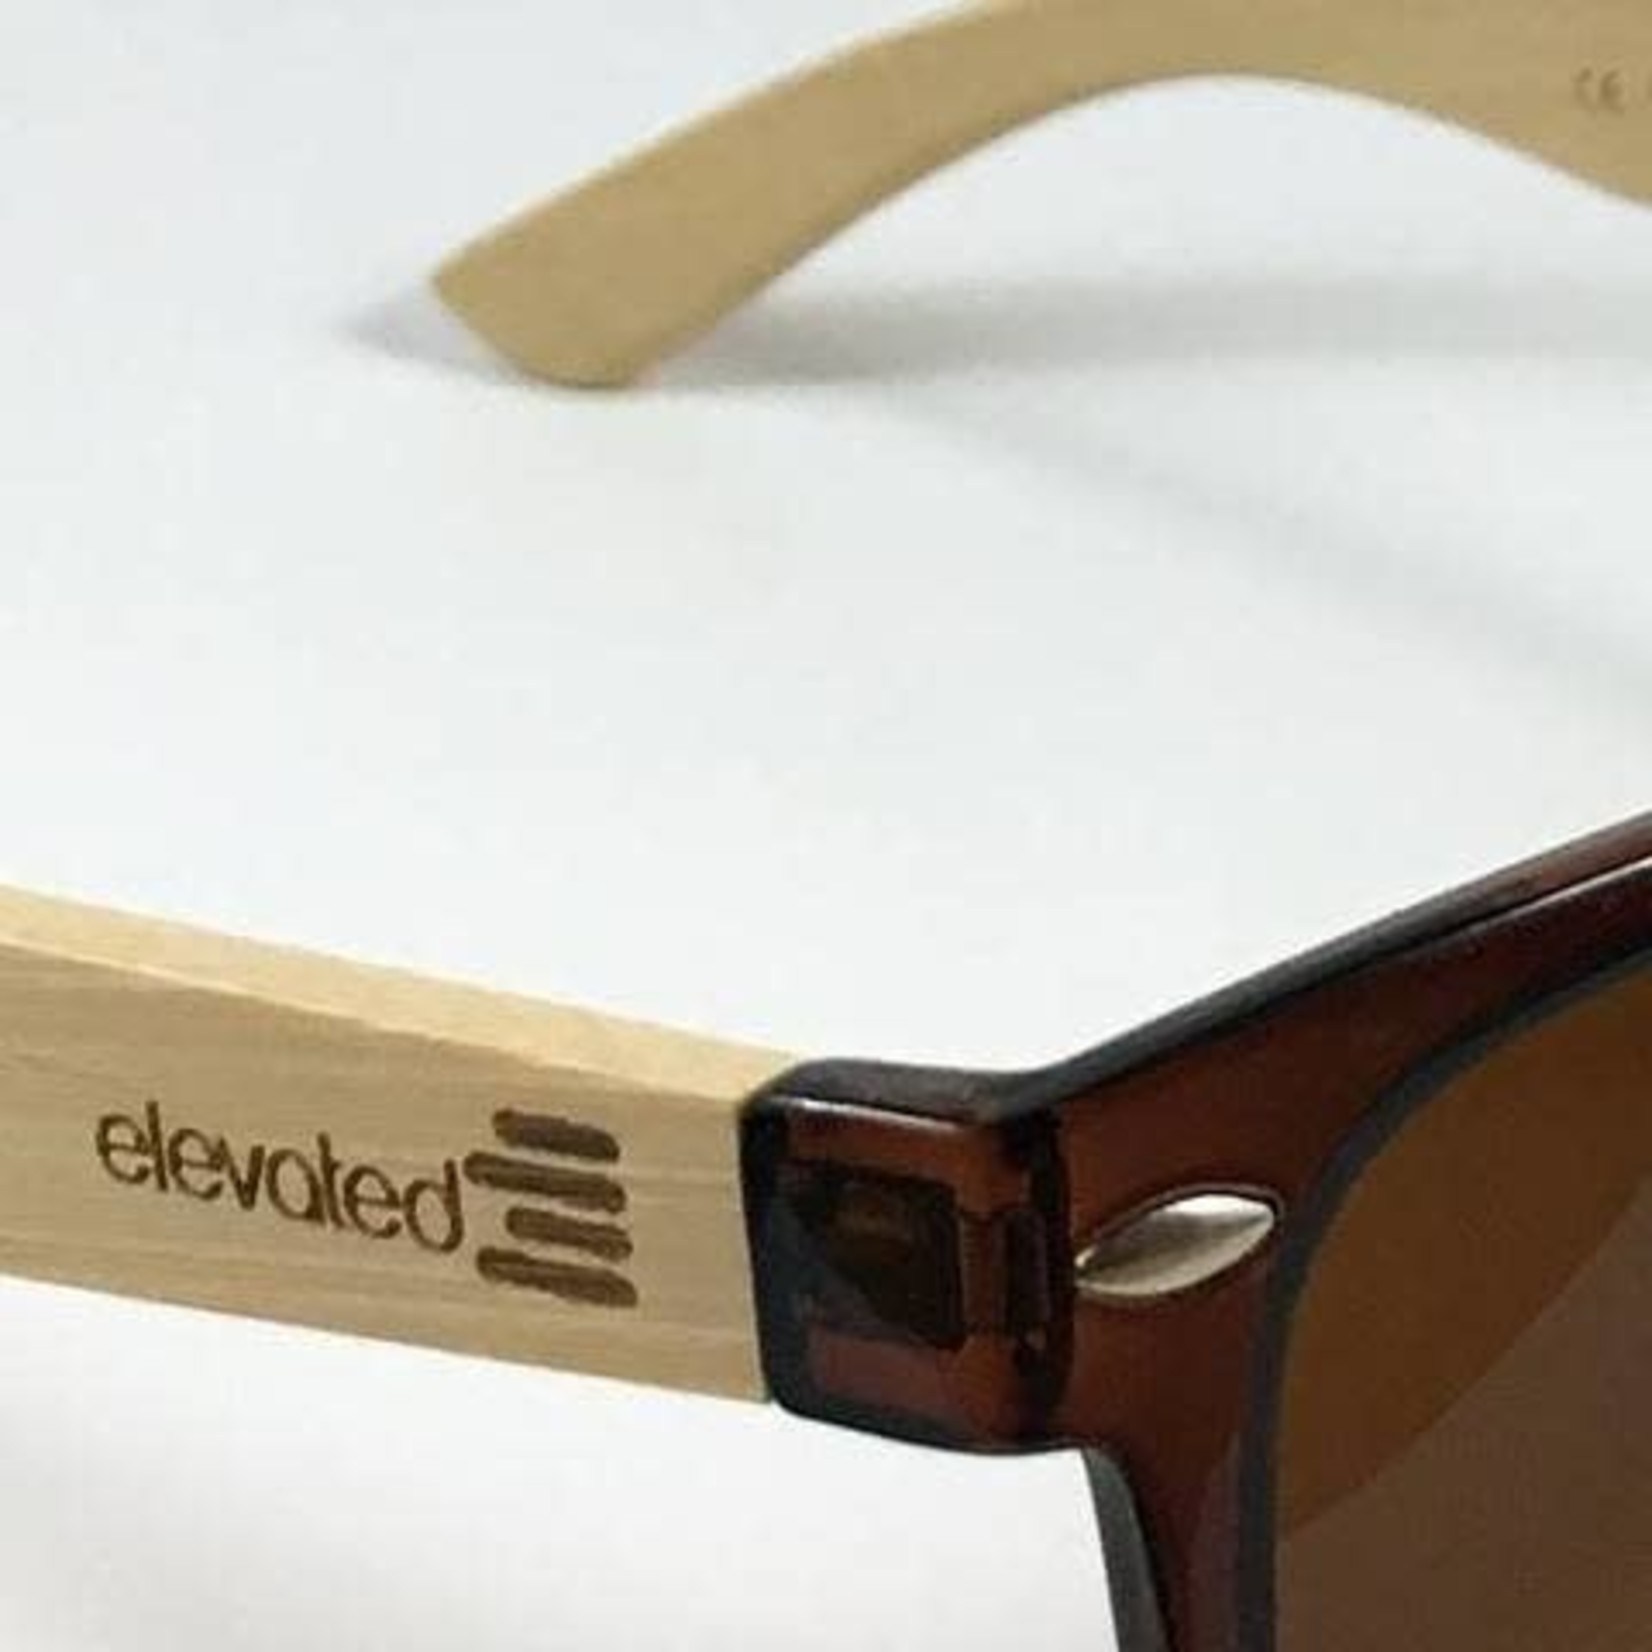 Elevated Shades Vanquished with Polarized Brown Lenses